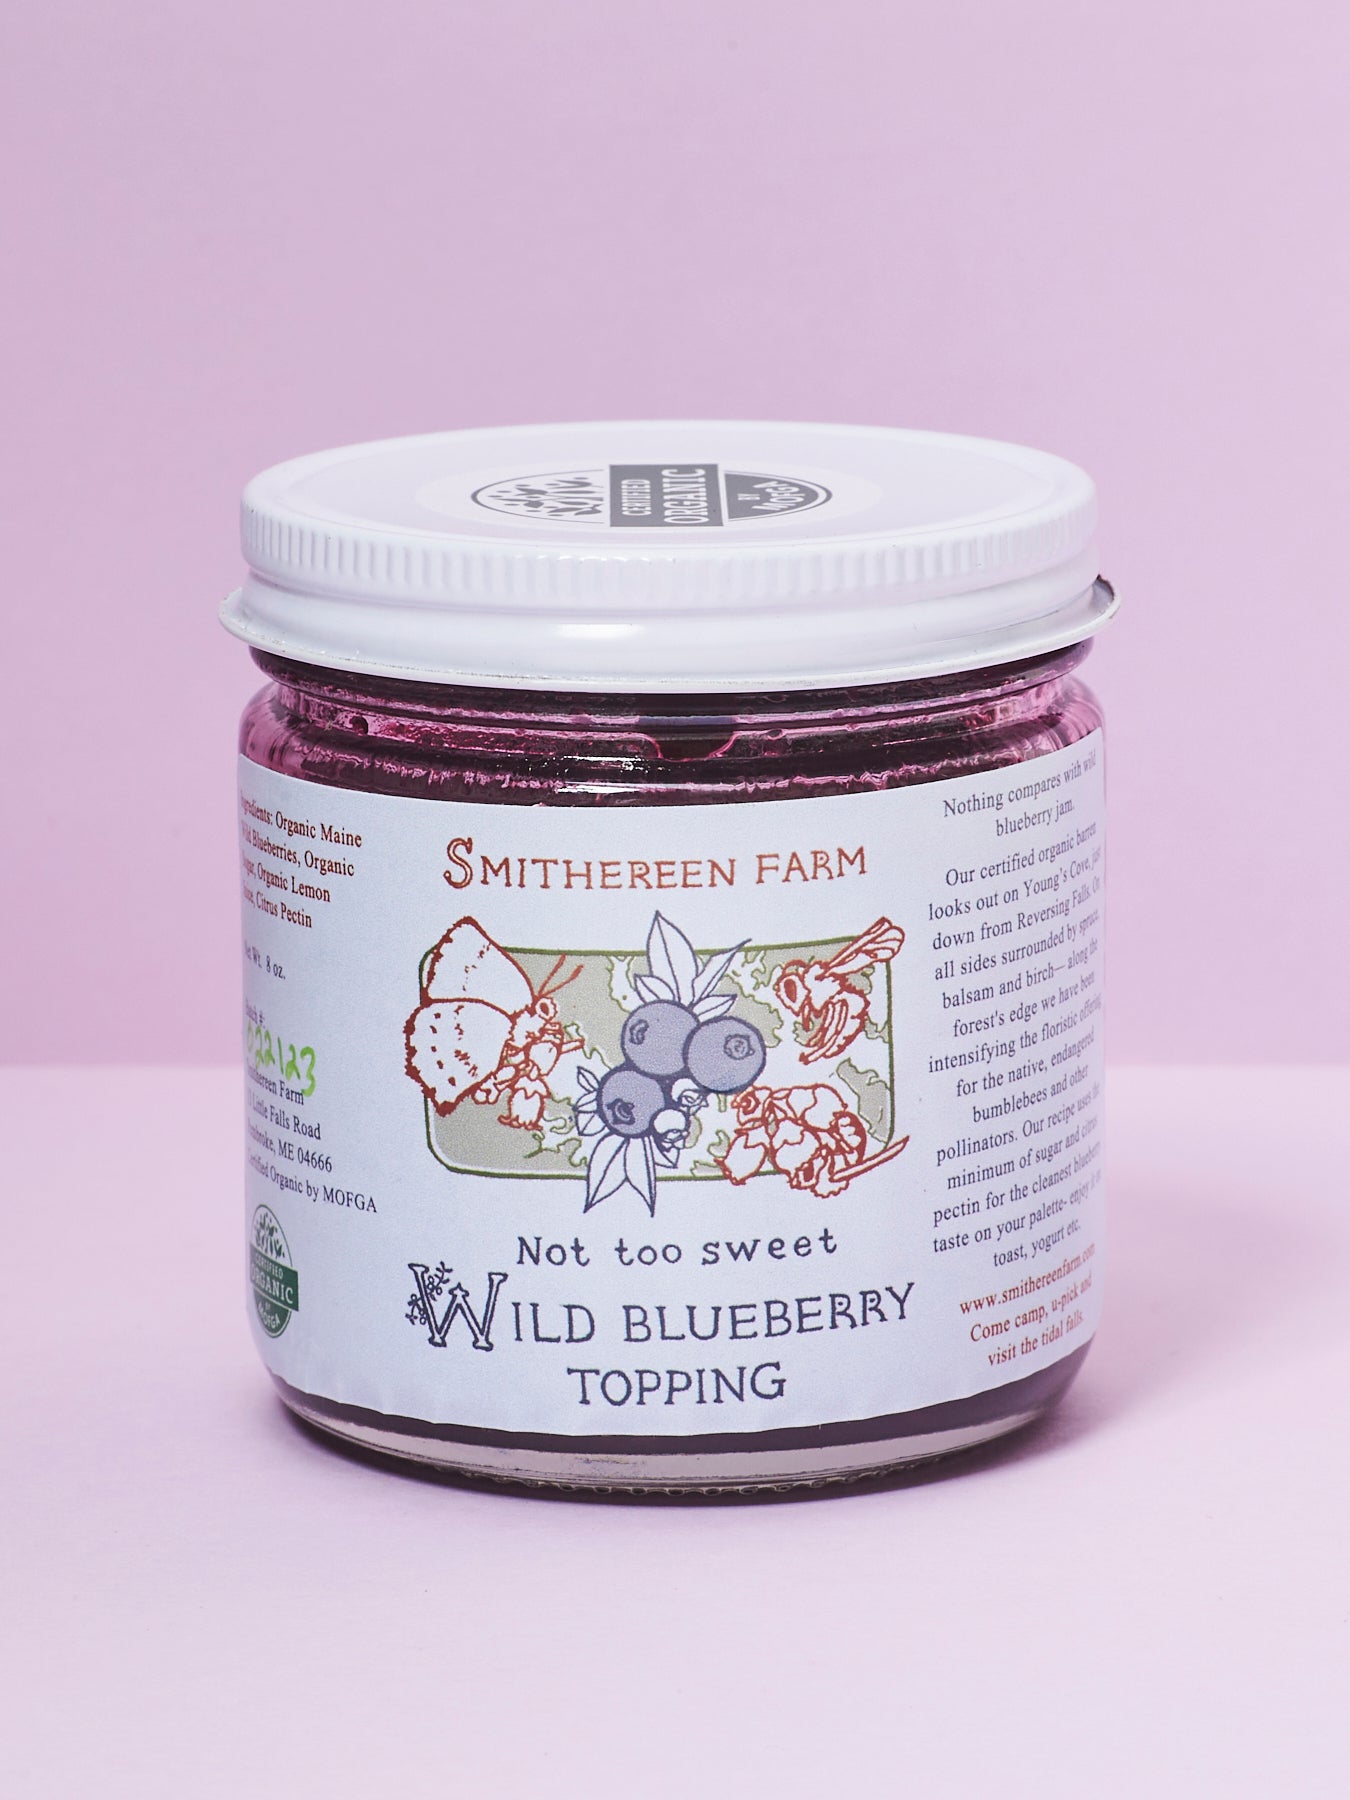 Wild Blueberry Topping